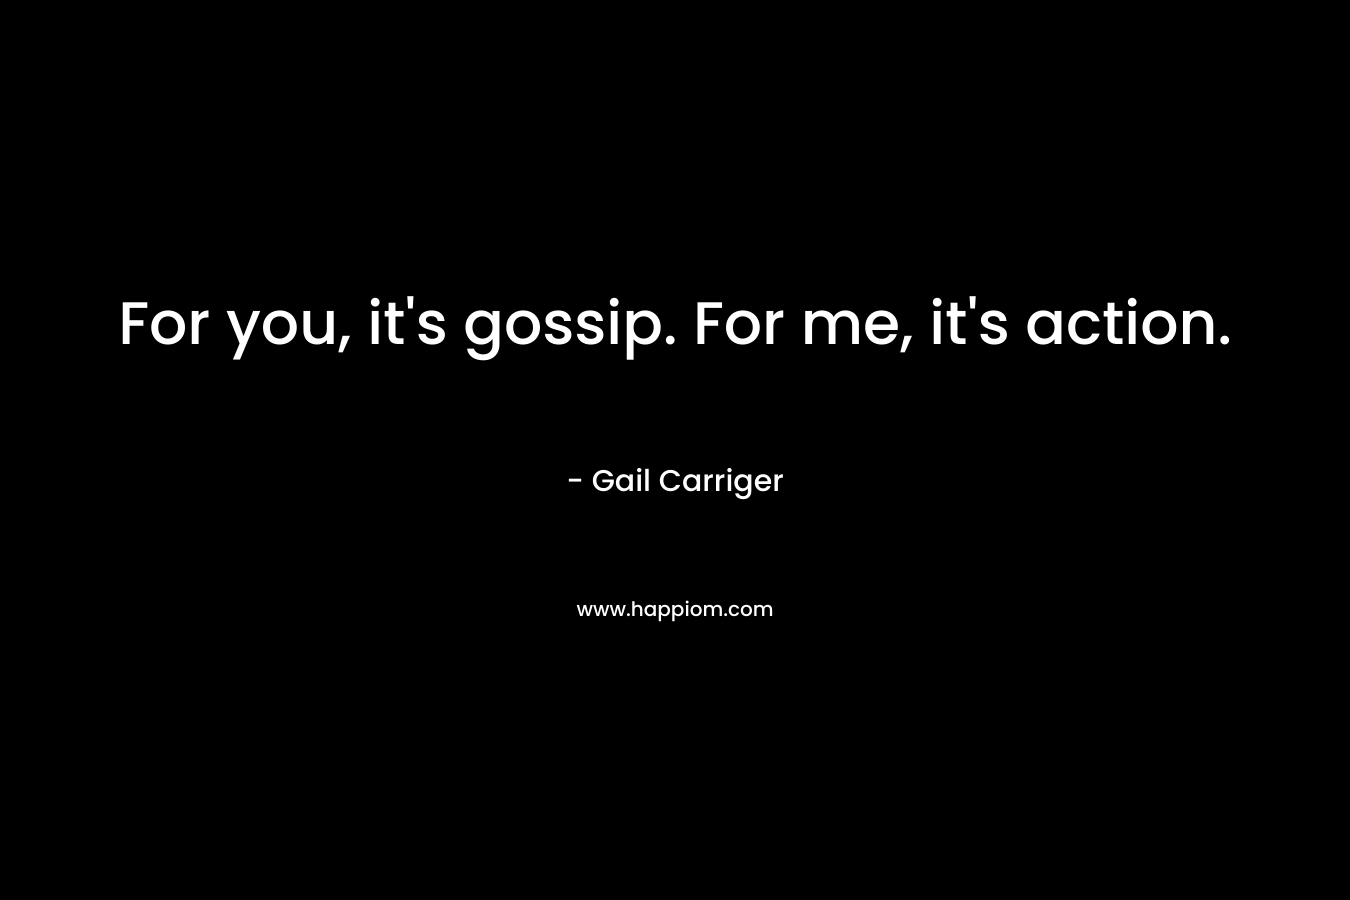 For you, it's gossip. For me, it's action.